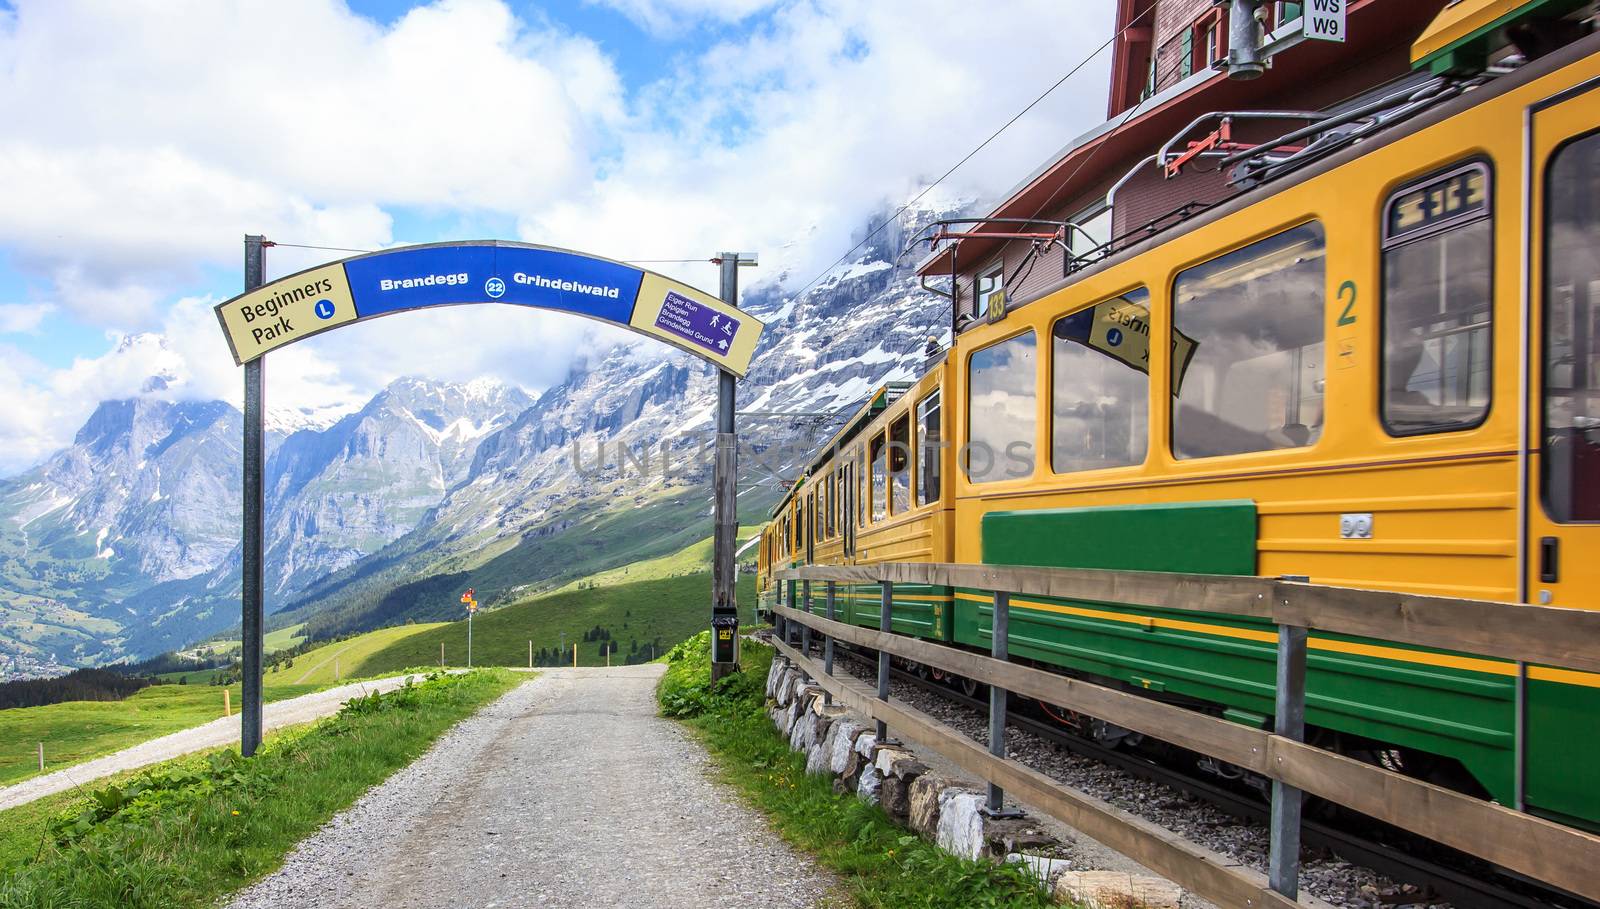 Sign of Starting point to begin walking trail with view of Swiss wengernalpbahn railways train departing Kleine Scheidegg station to Grindelwald, Switzerland. Walking trail along green fresh meadow with snow capped mountains as a background by victorflowerfly